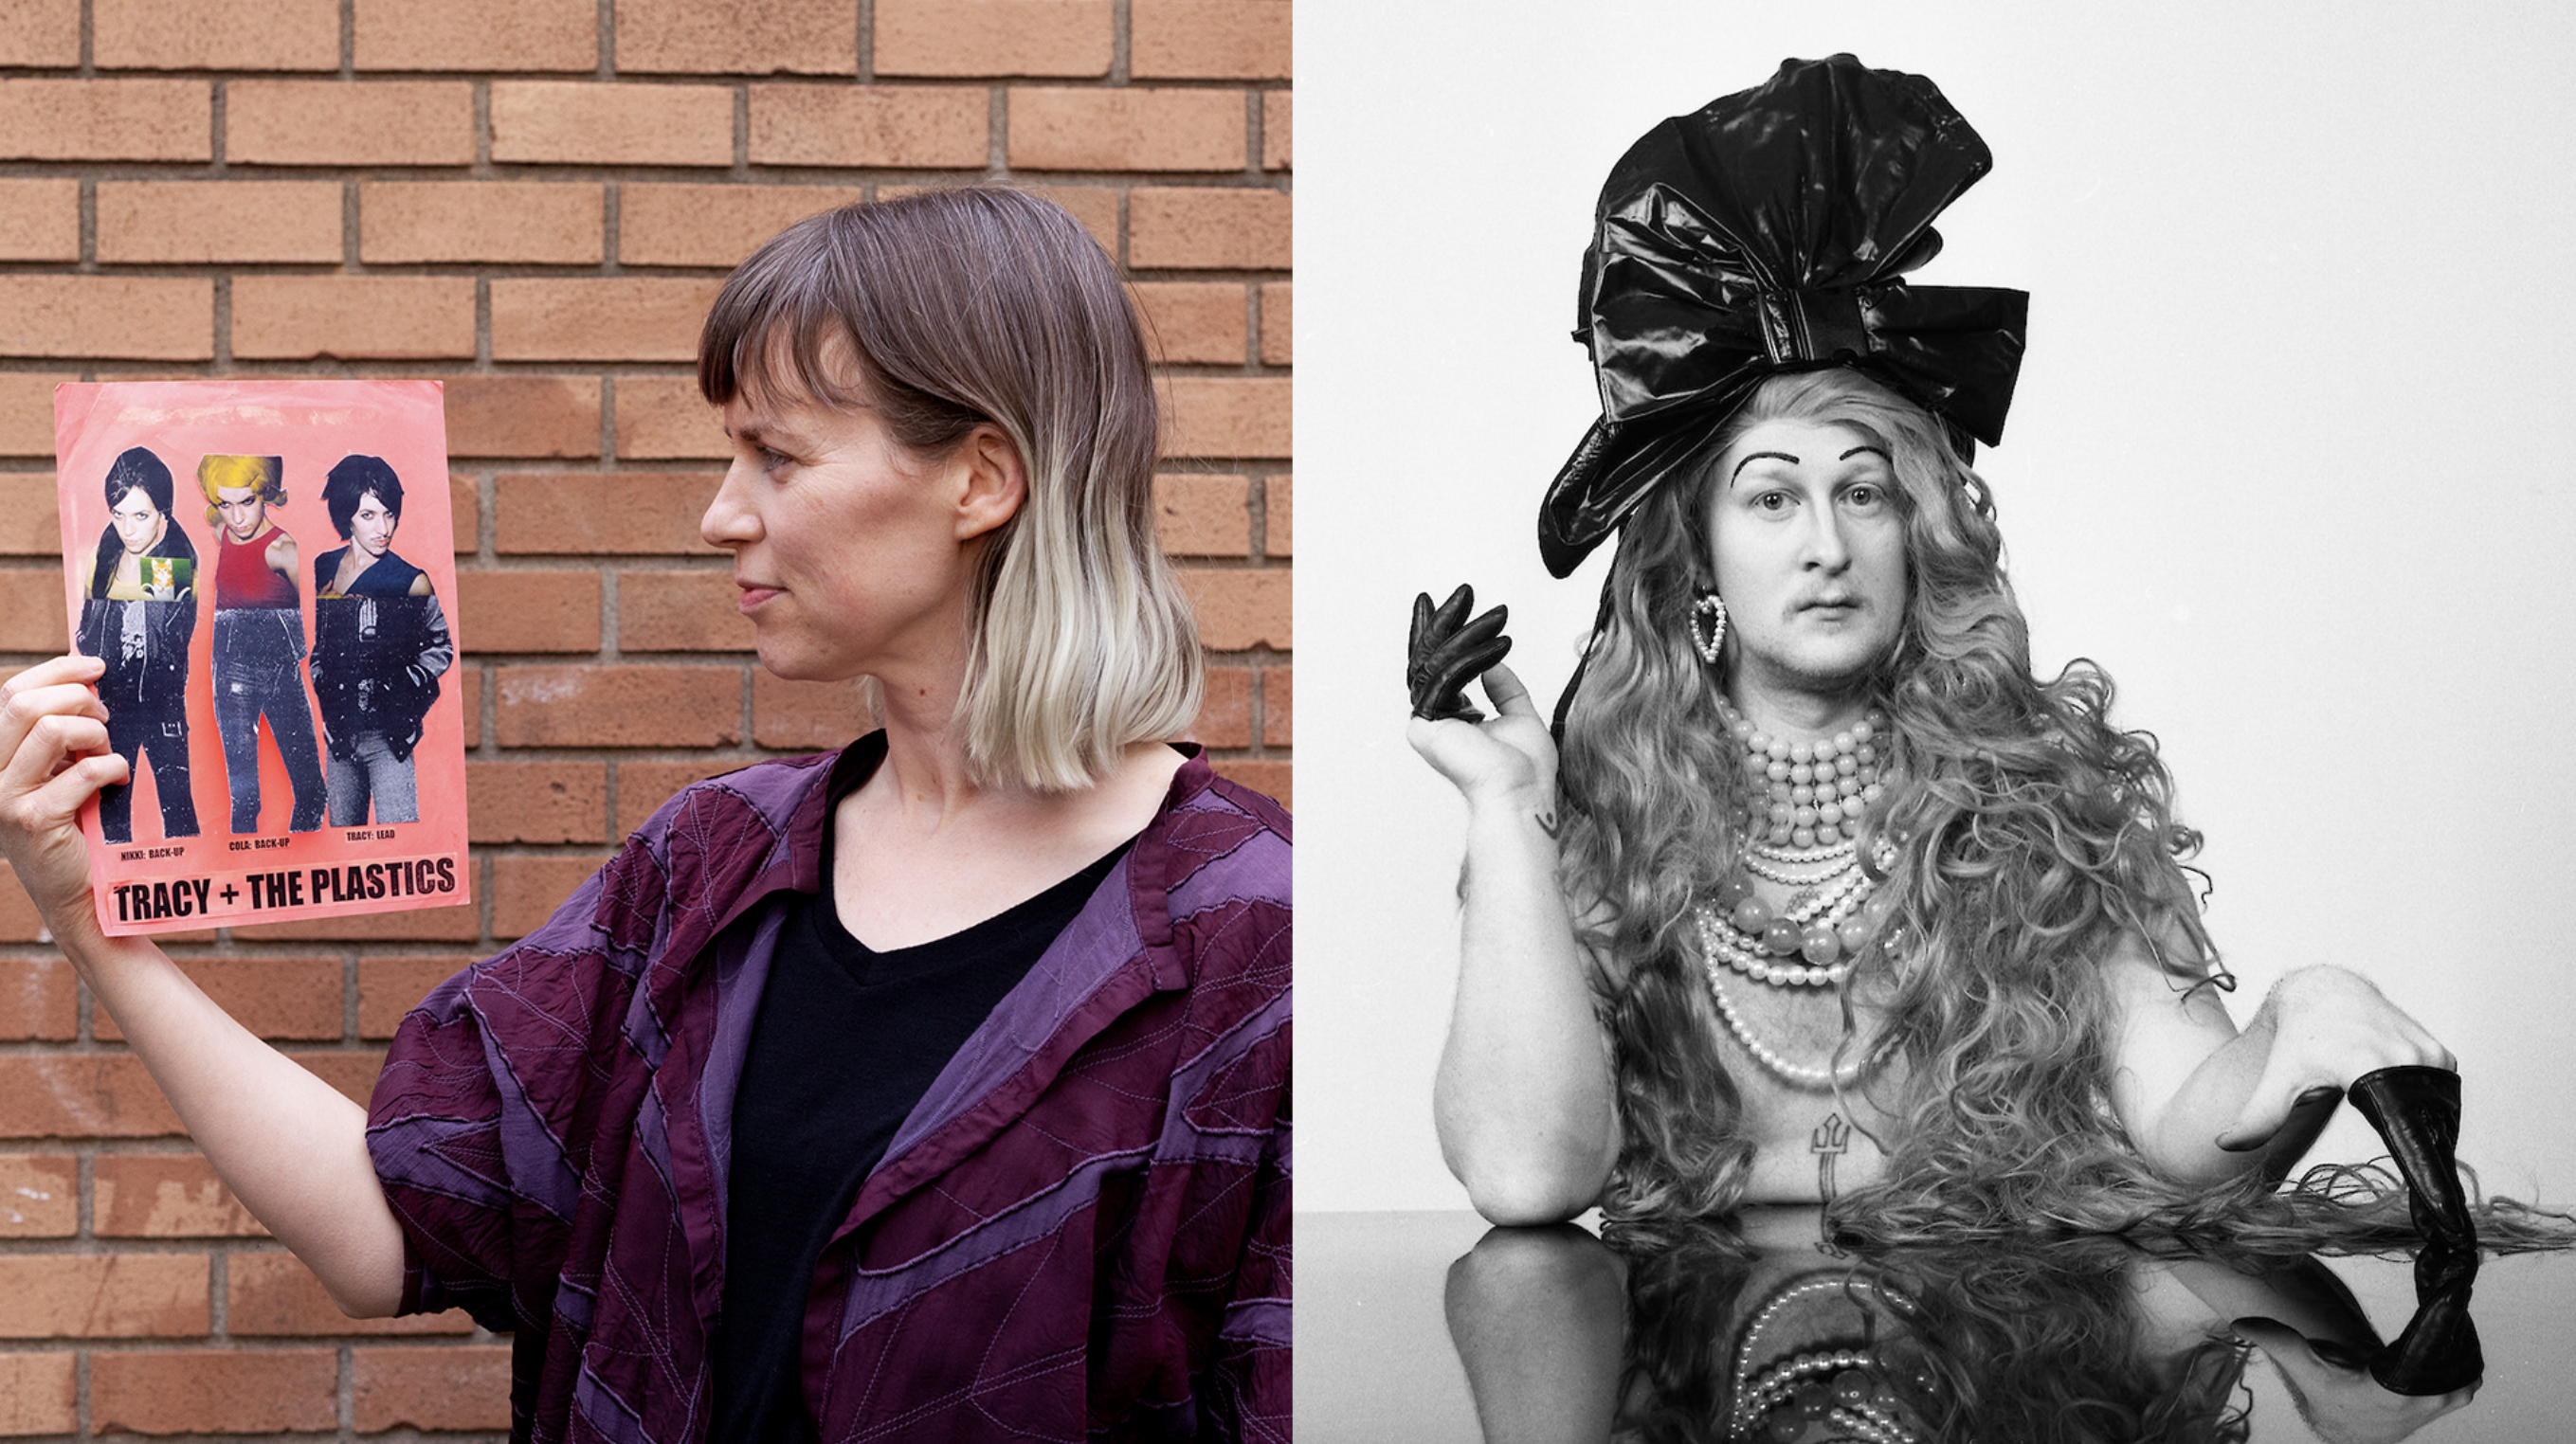 Images: Left) Wynne Greenwood. Photo by Jenny Riffle. Courtesy of the artist. Right) Colin Self. Photo by Milena Kirche. Courtesy of the artist.